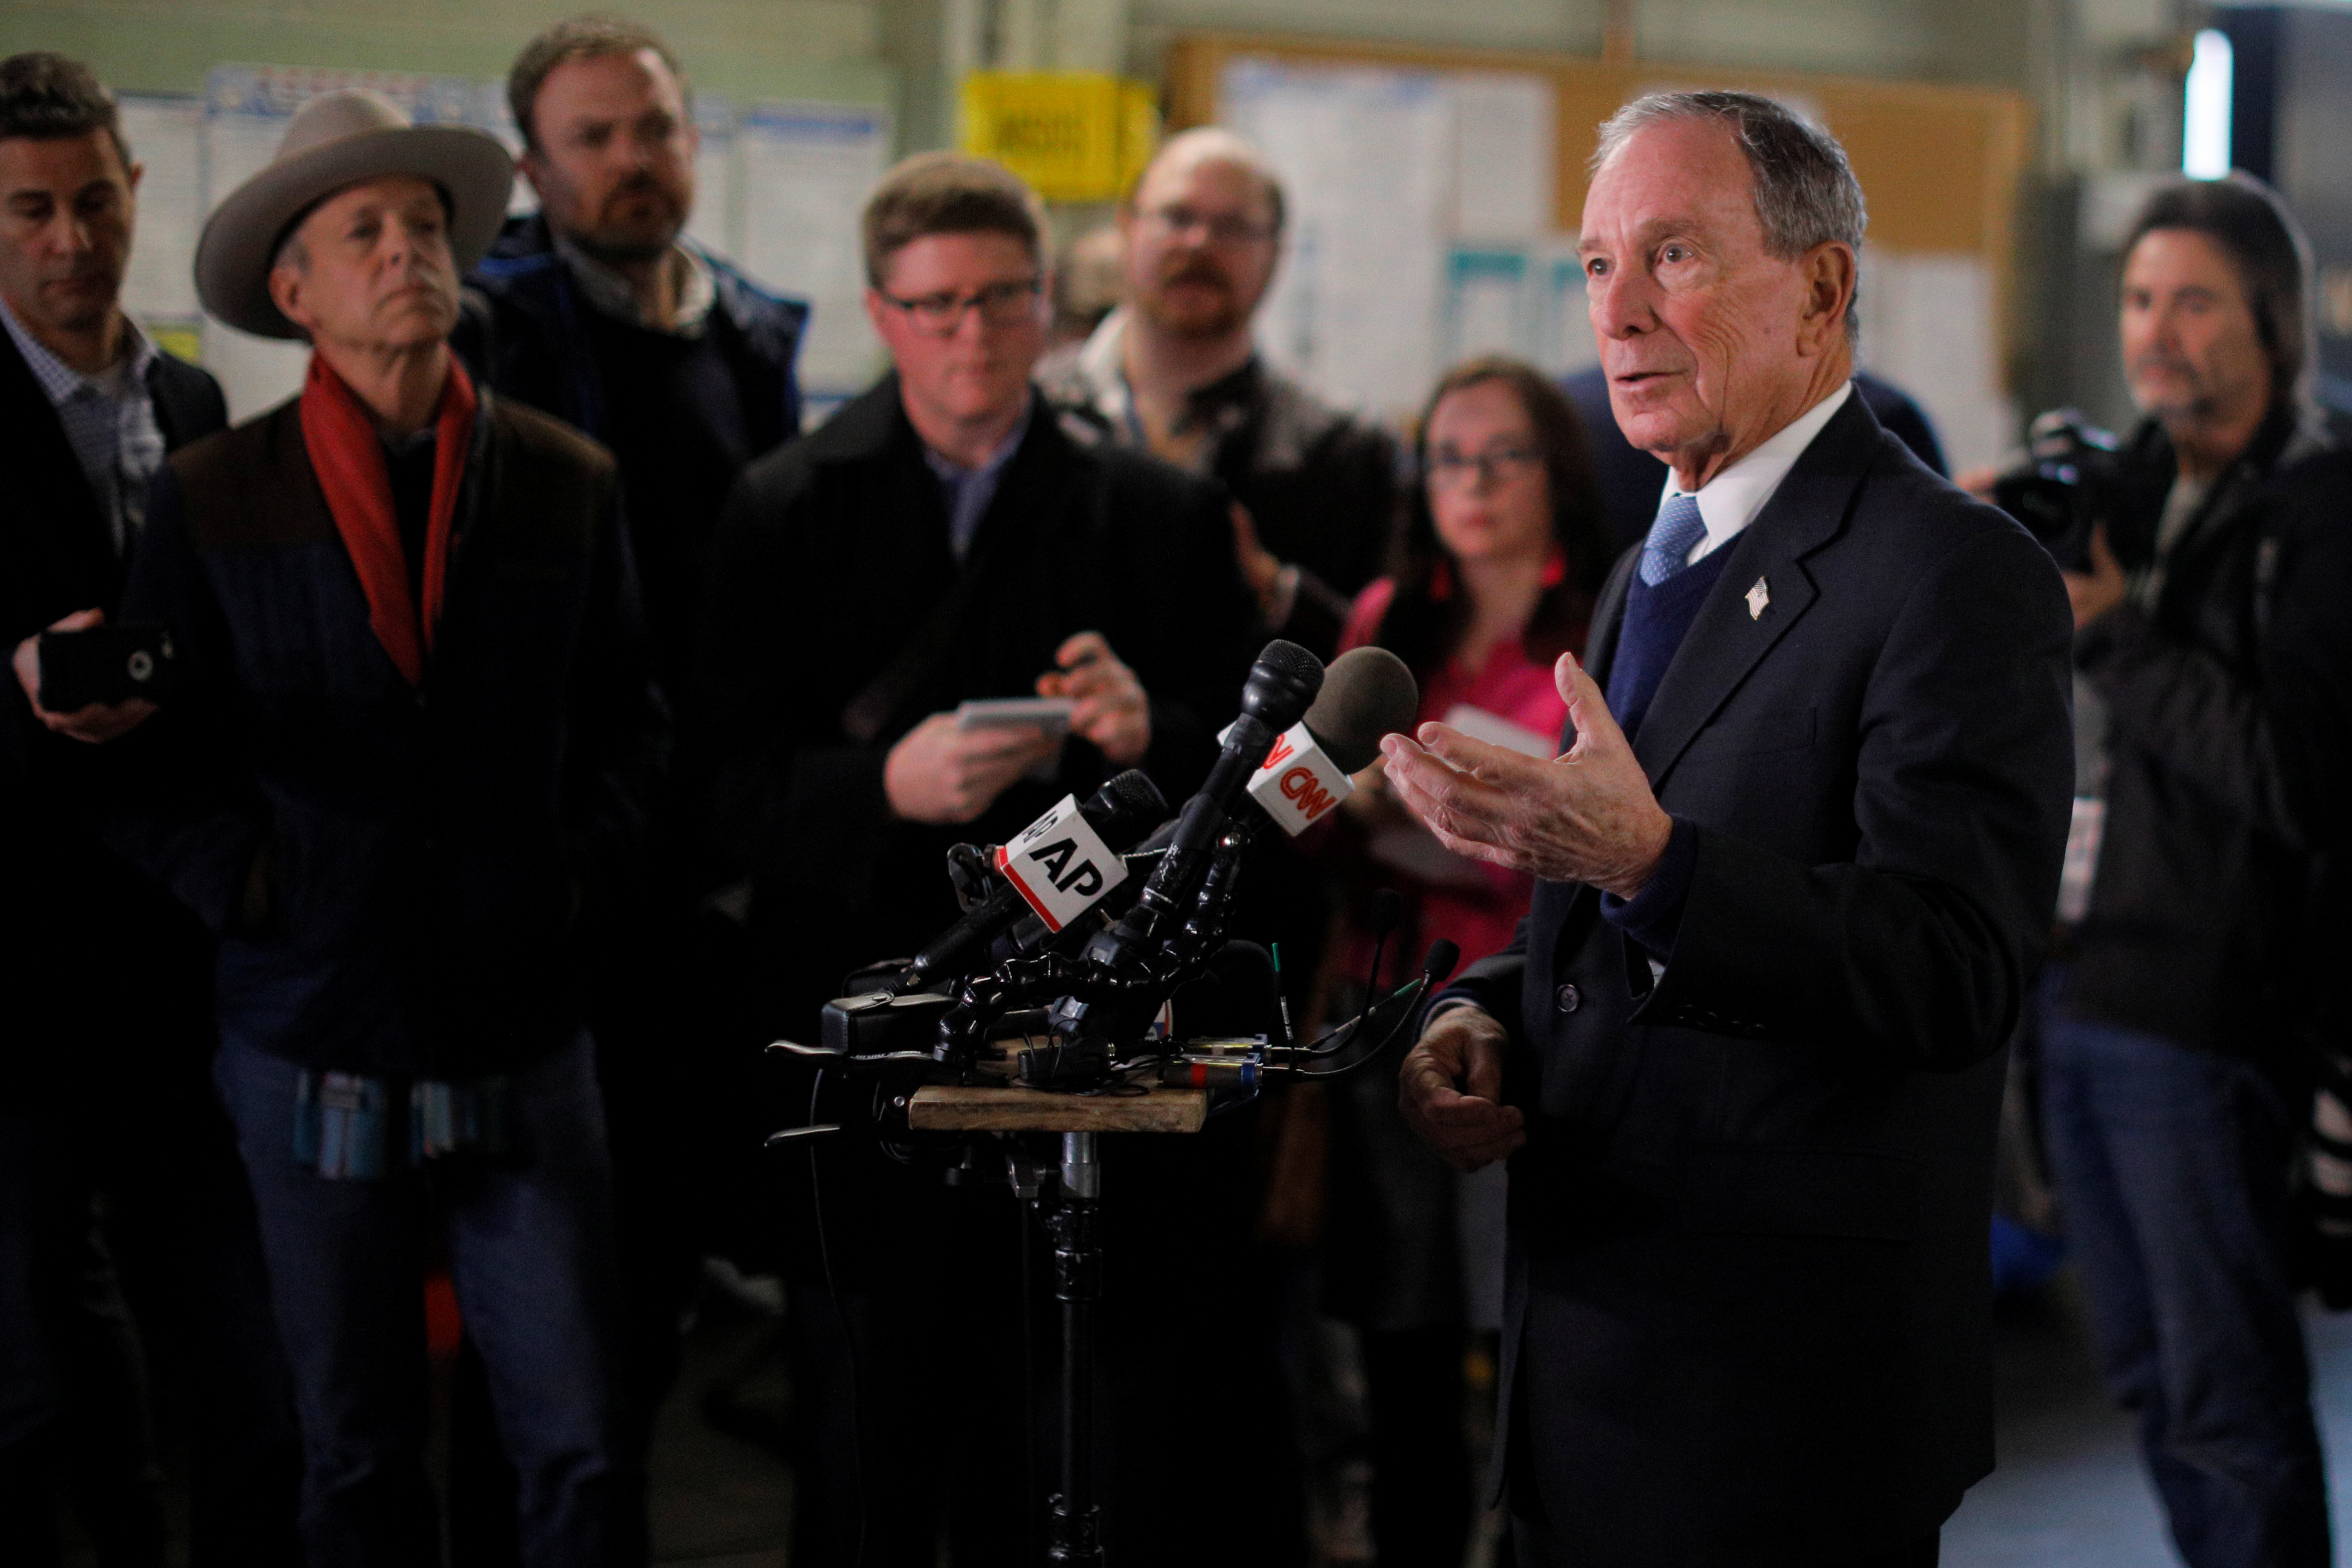 Former New York City Mayor Bloomberg answers questions from reporters in Nashua